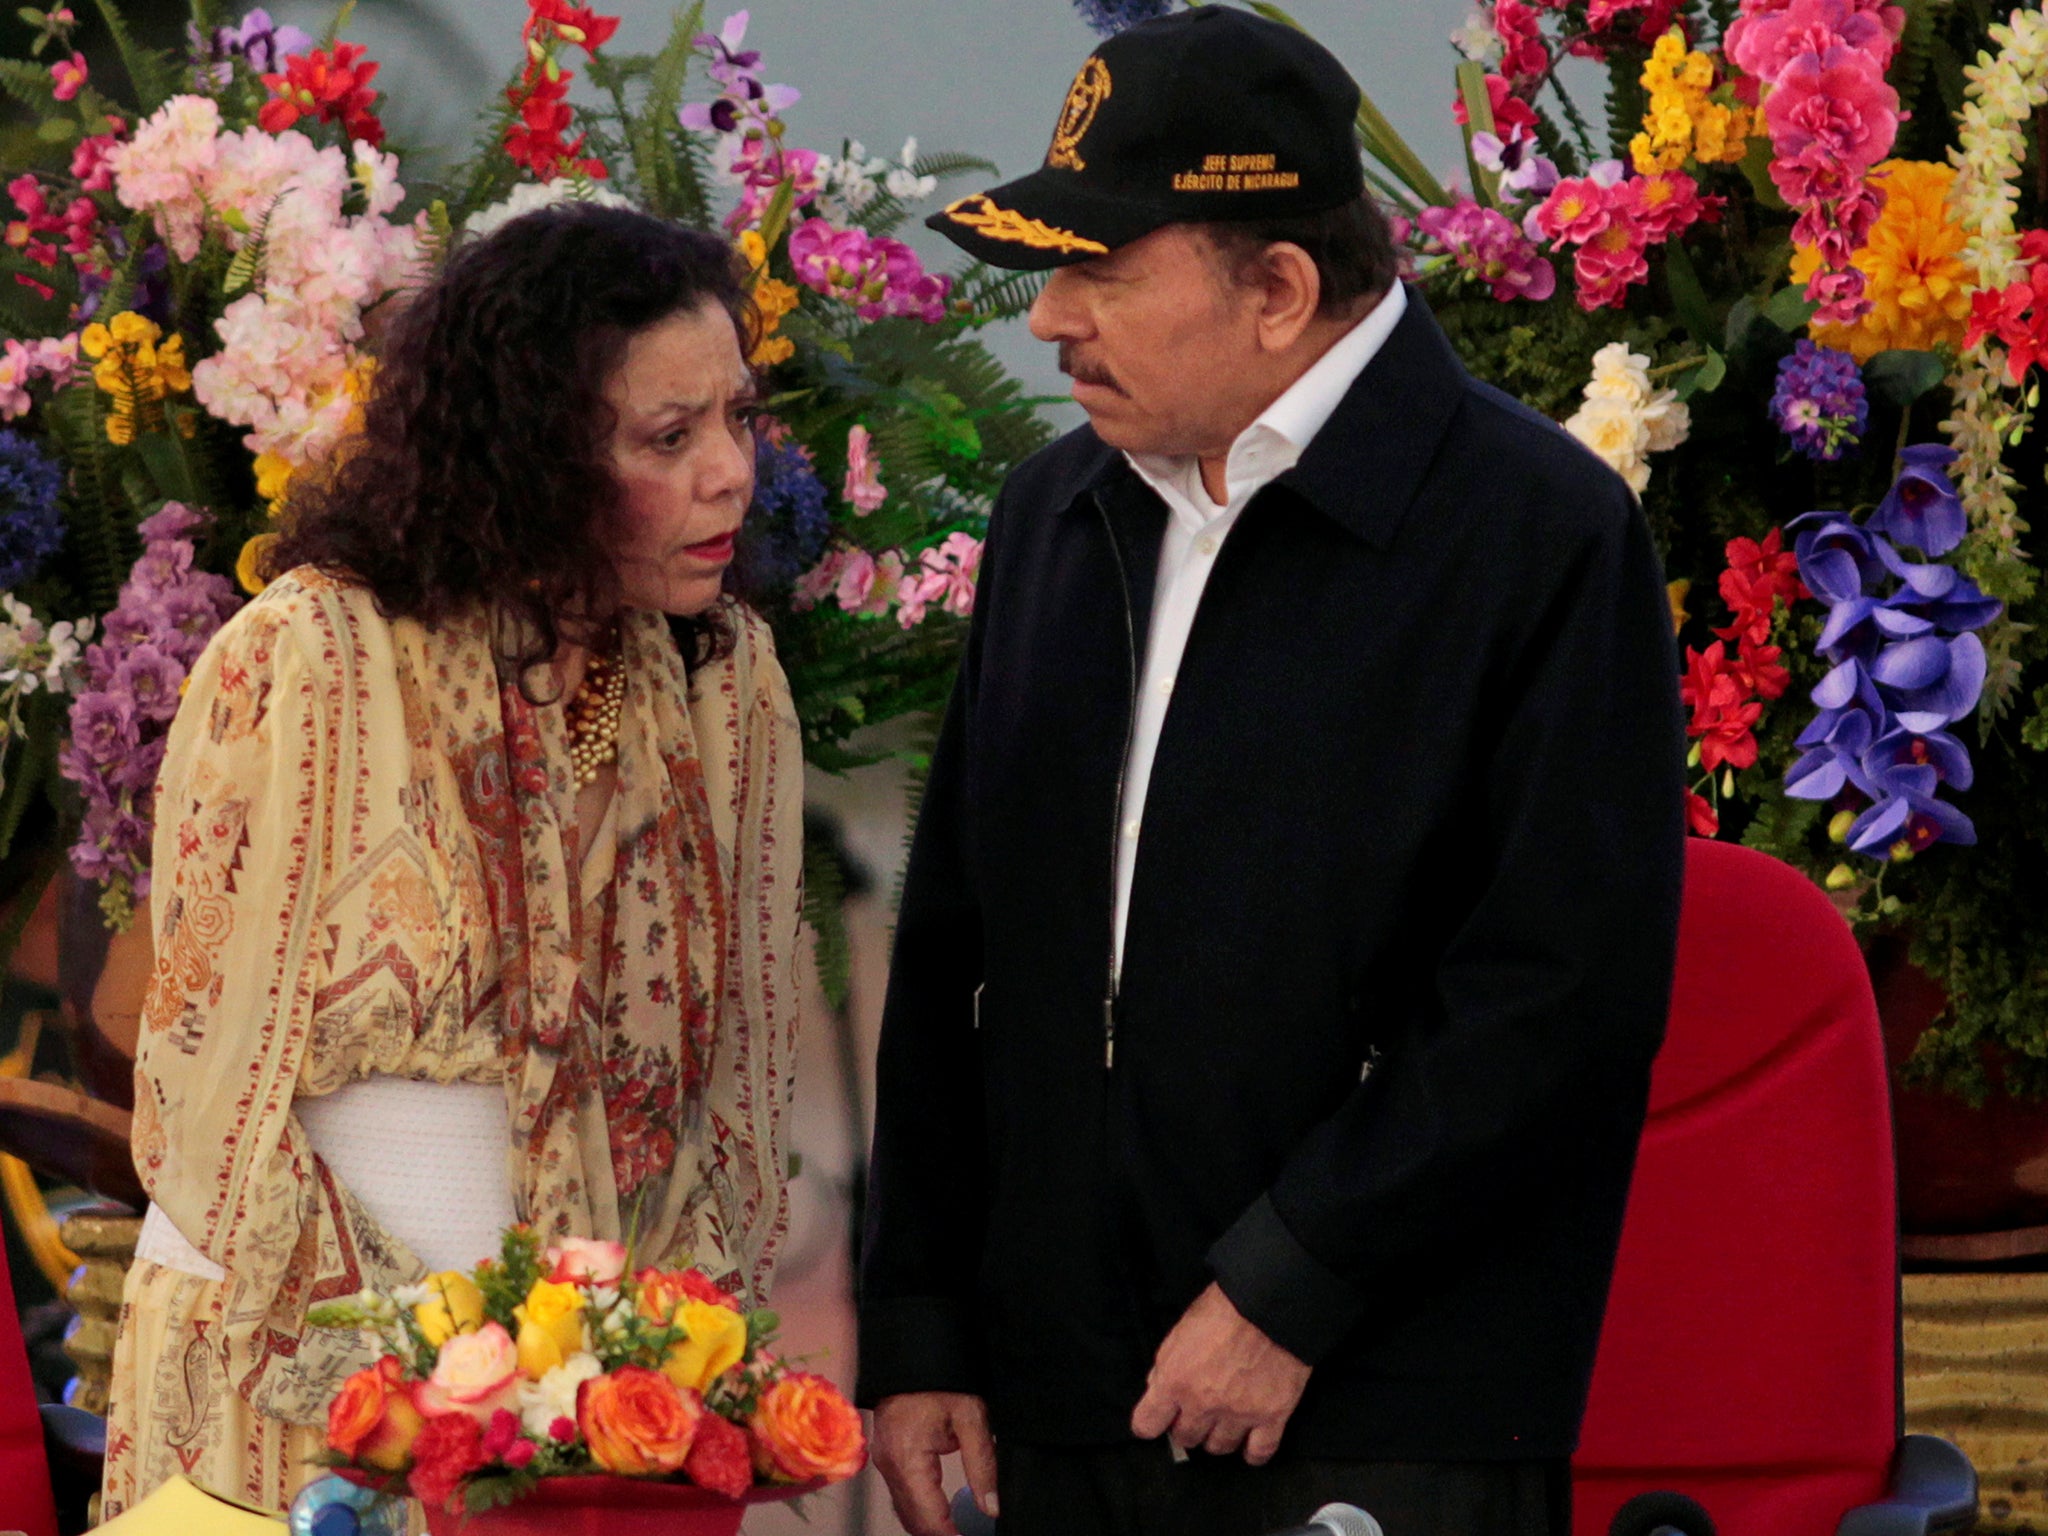 Nicaragua's President Daniel Ortega speaks with his wife Rosario Murillo during a commemoration of the 37th anniversary of the founding of the army in Managua